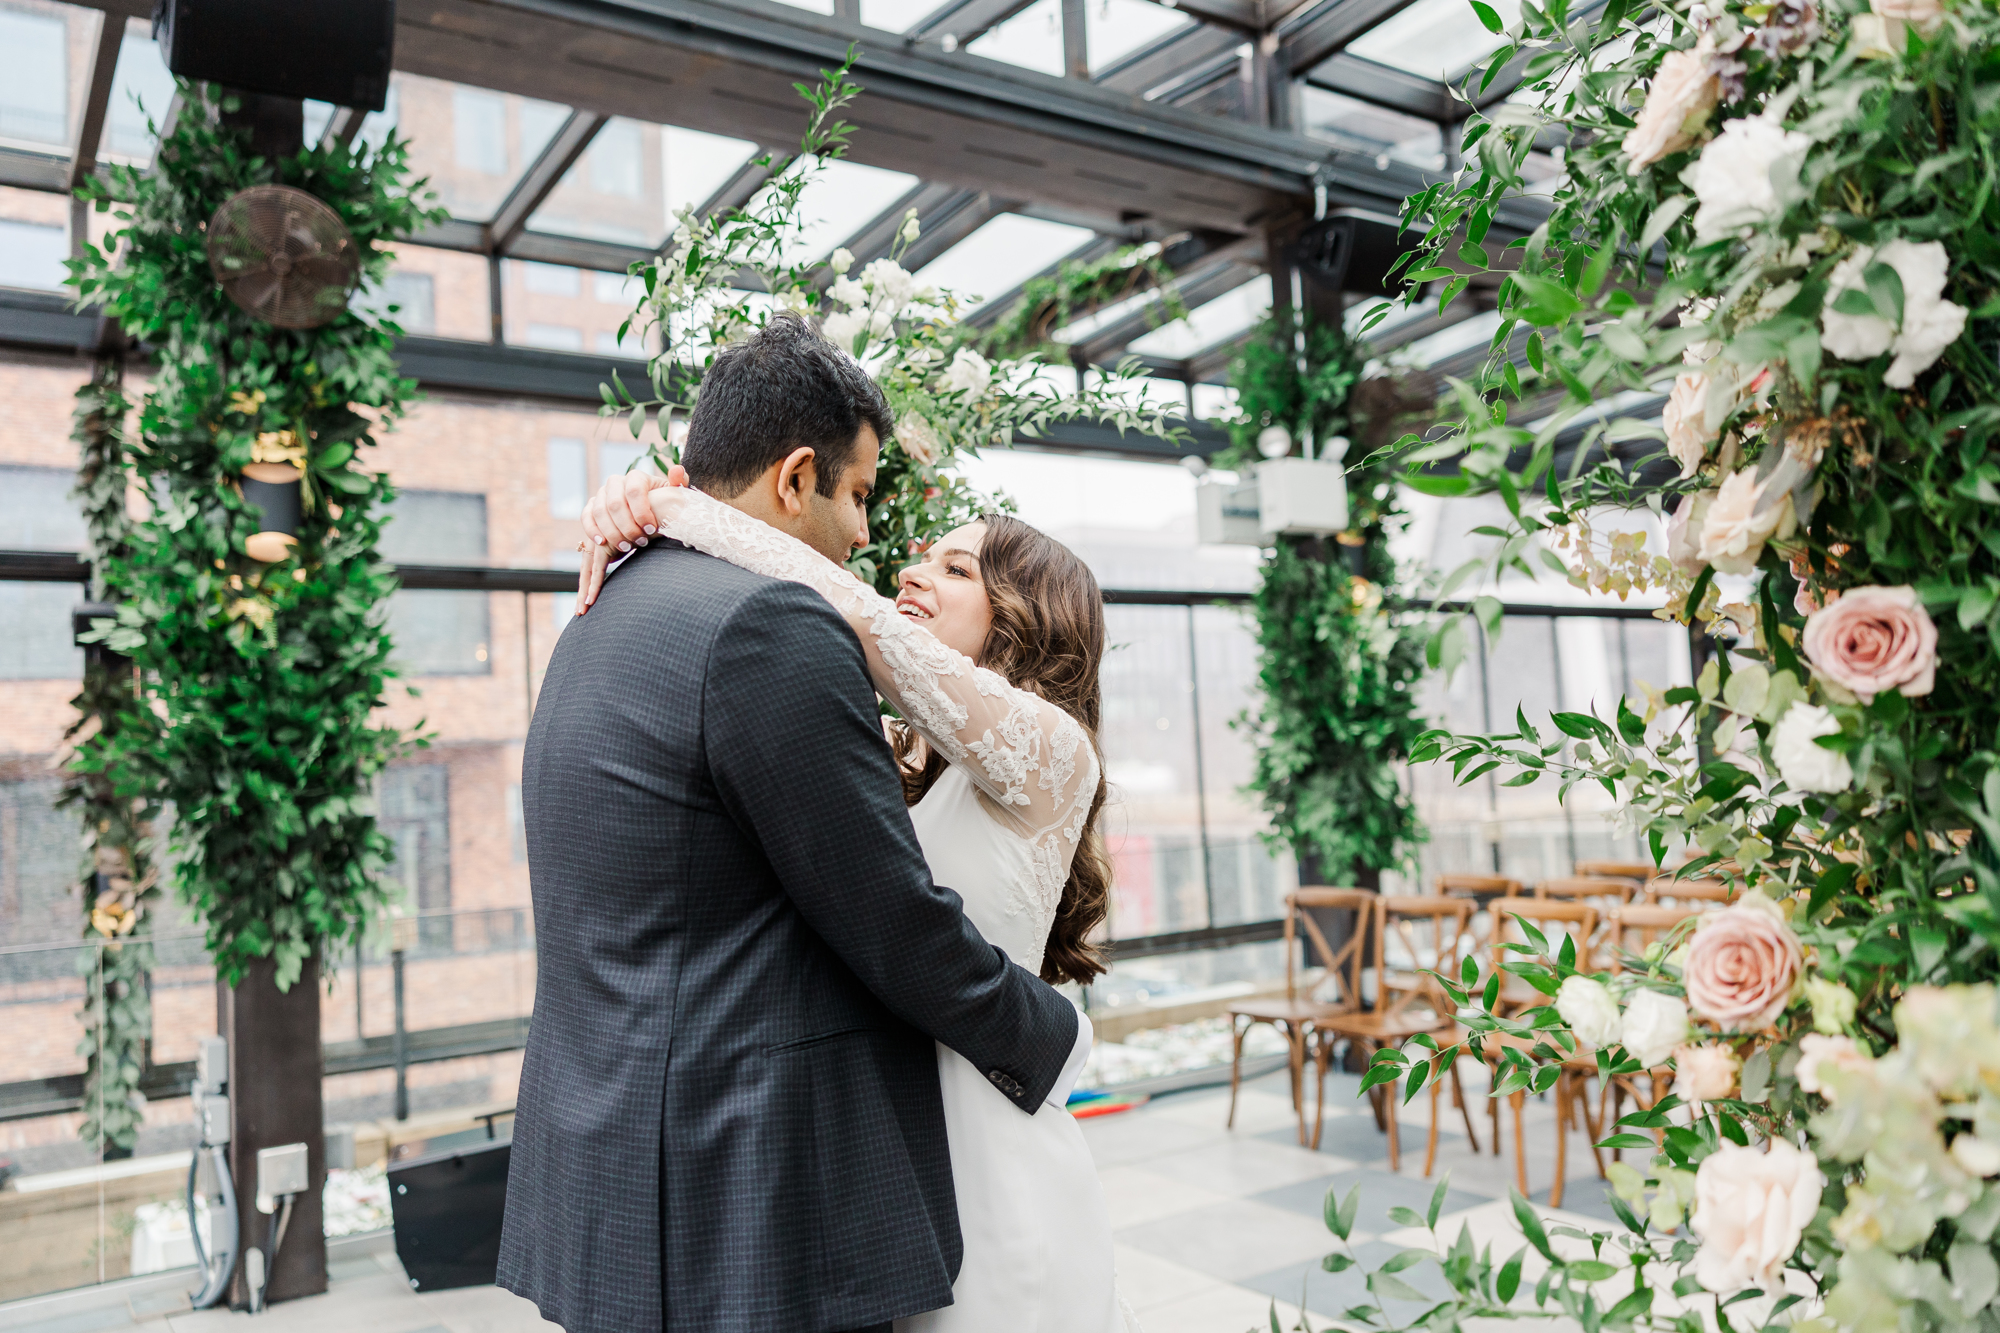 Romantic Brooklyn Wedding Photography at 74Wythe with Rooftop NYC Views